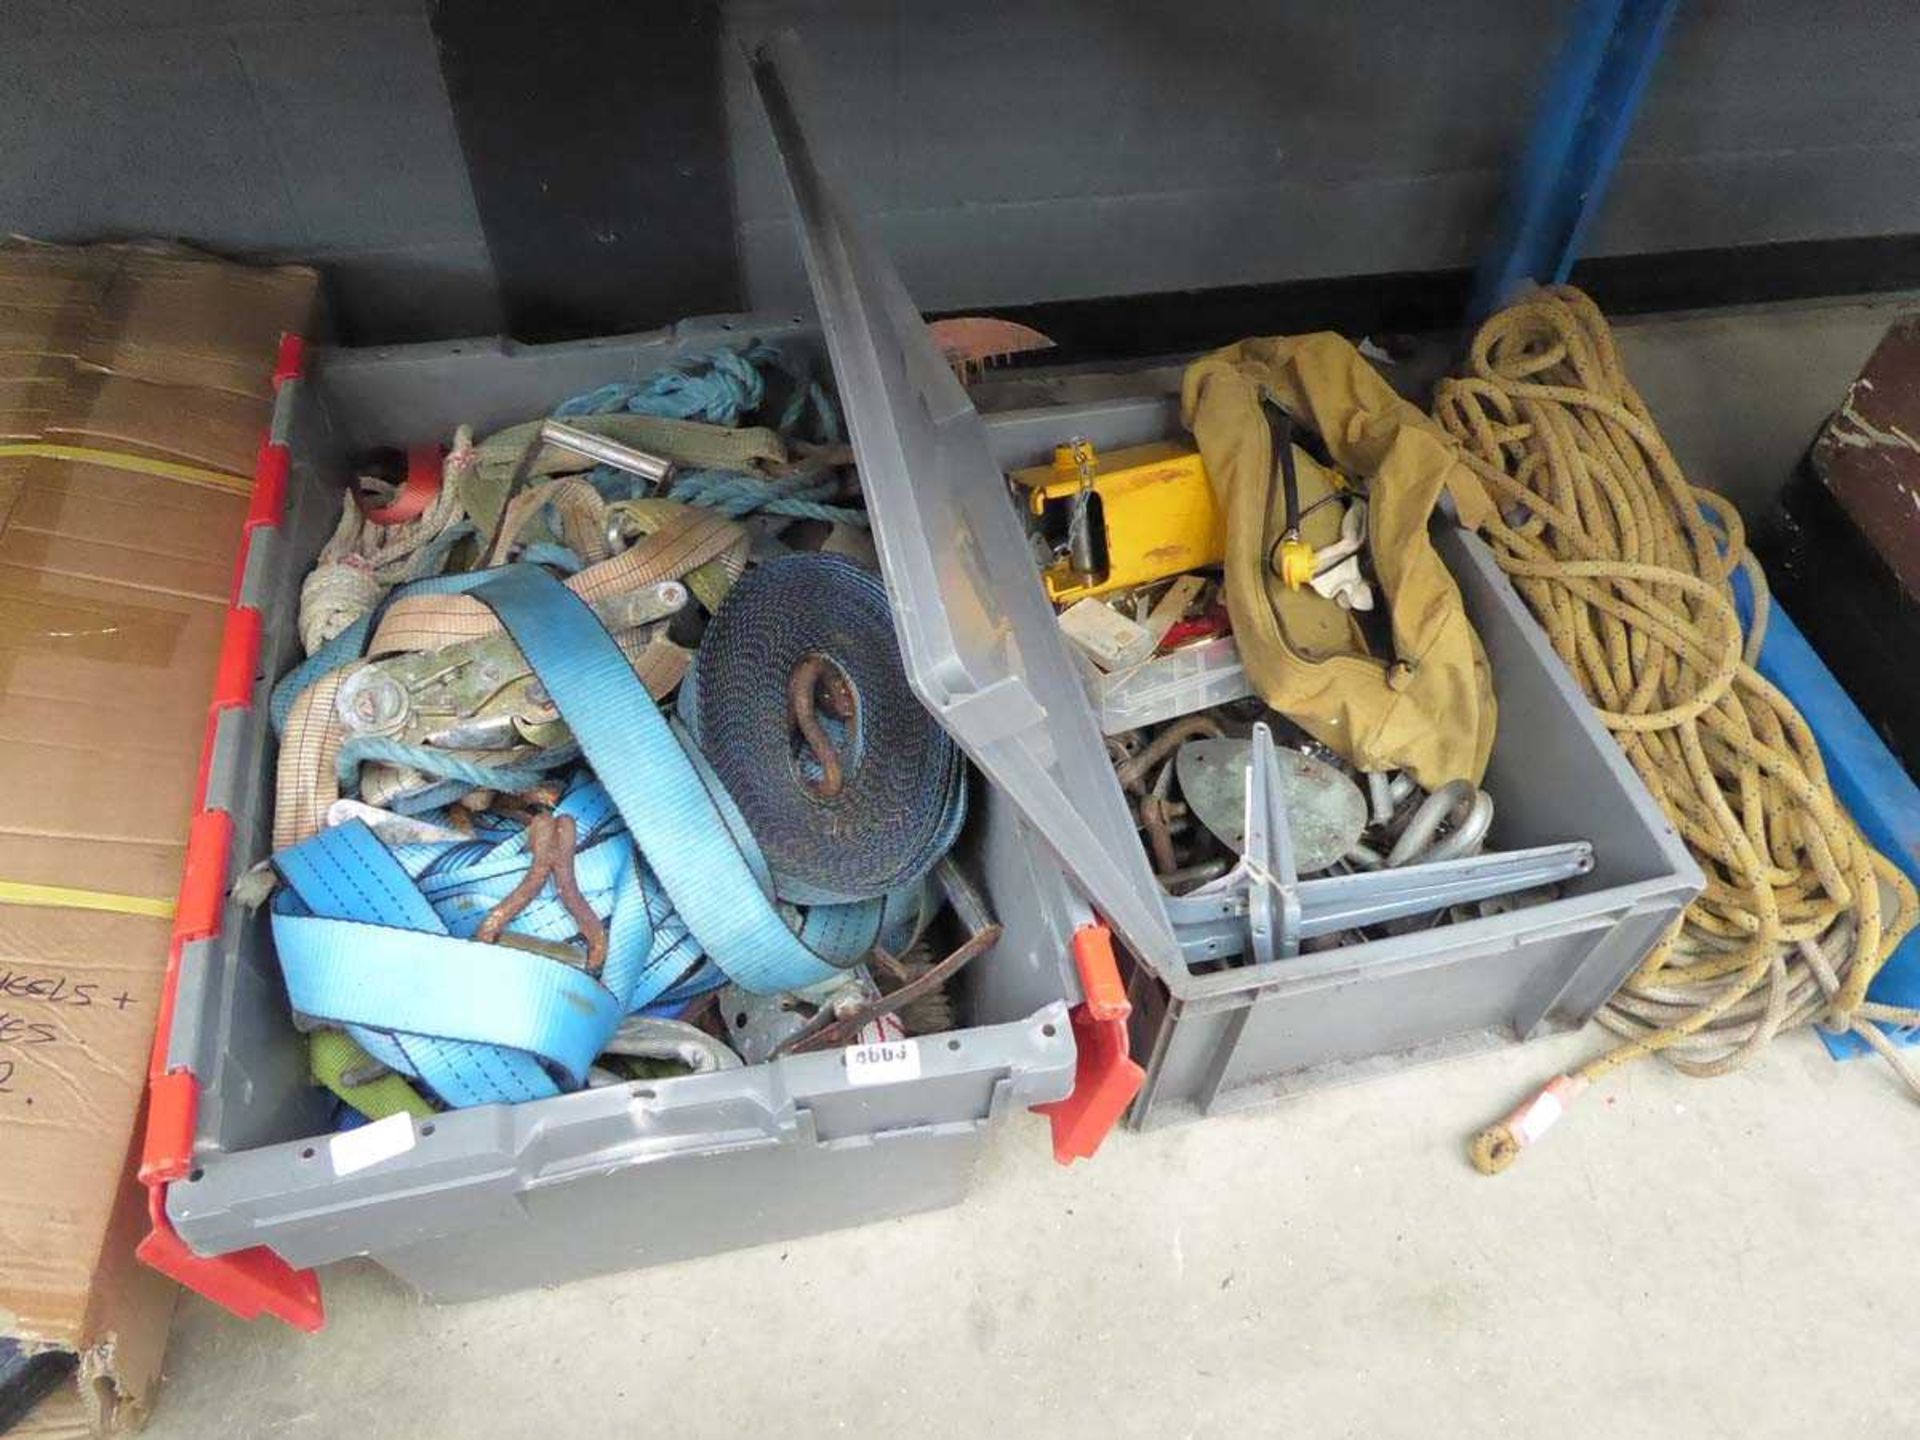 2 boxes of lorry straps, shackles and rope